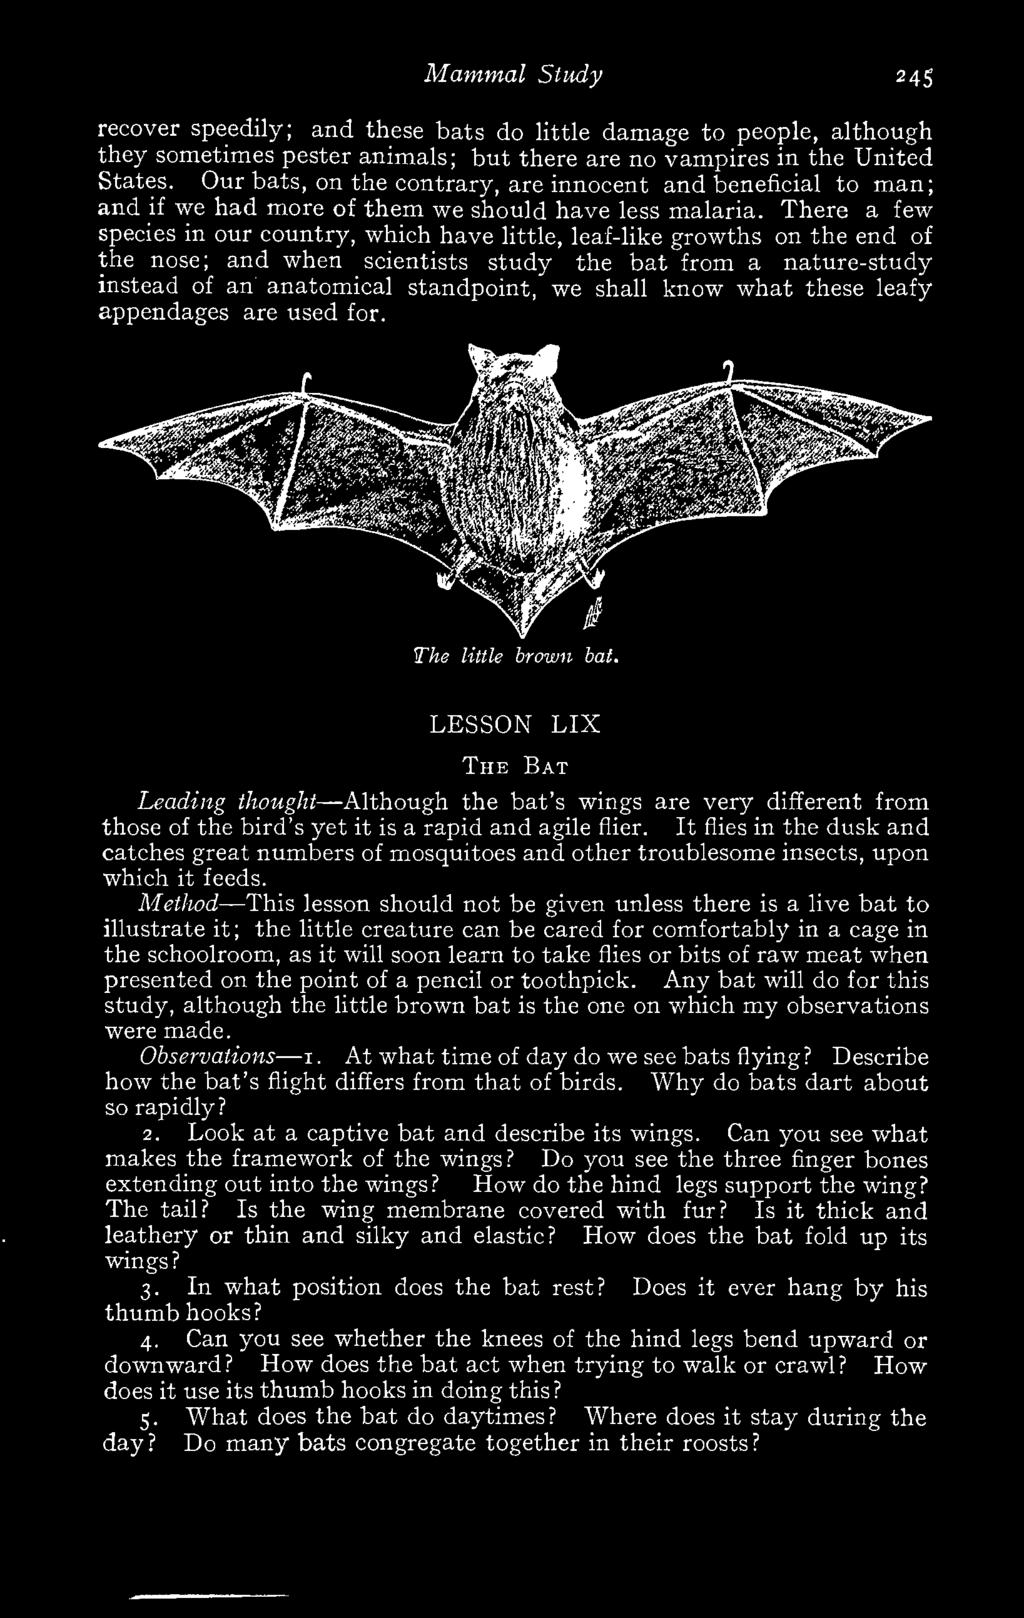 LESSON LIX The Bat Leading thought -Although the bat's wings are very different from those of the bird's yet it is a rapid and agile flier.